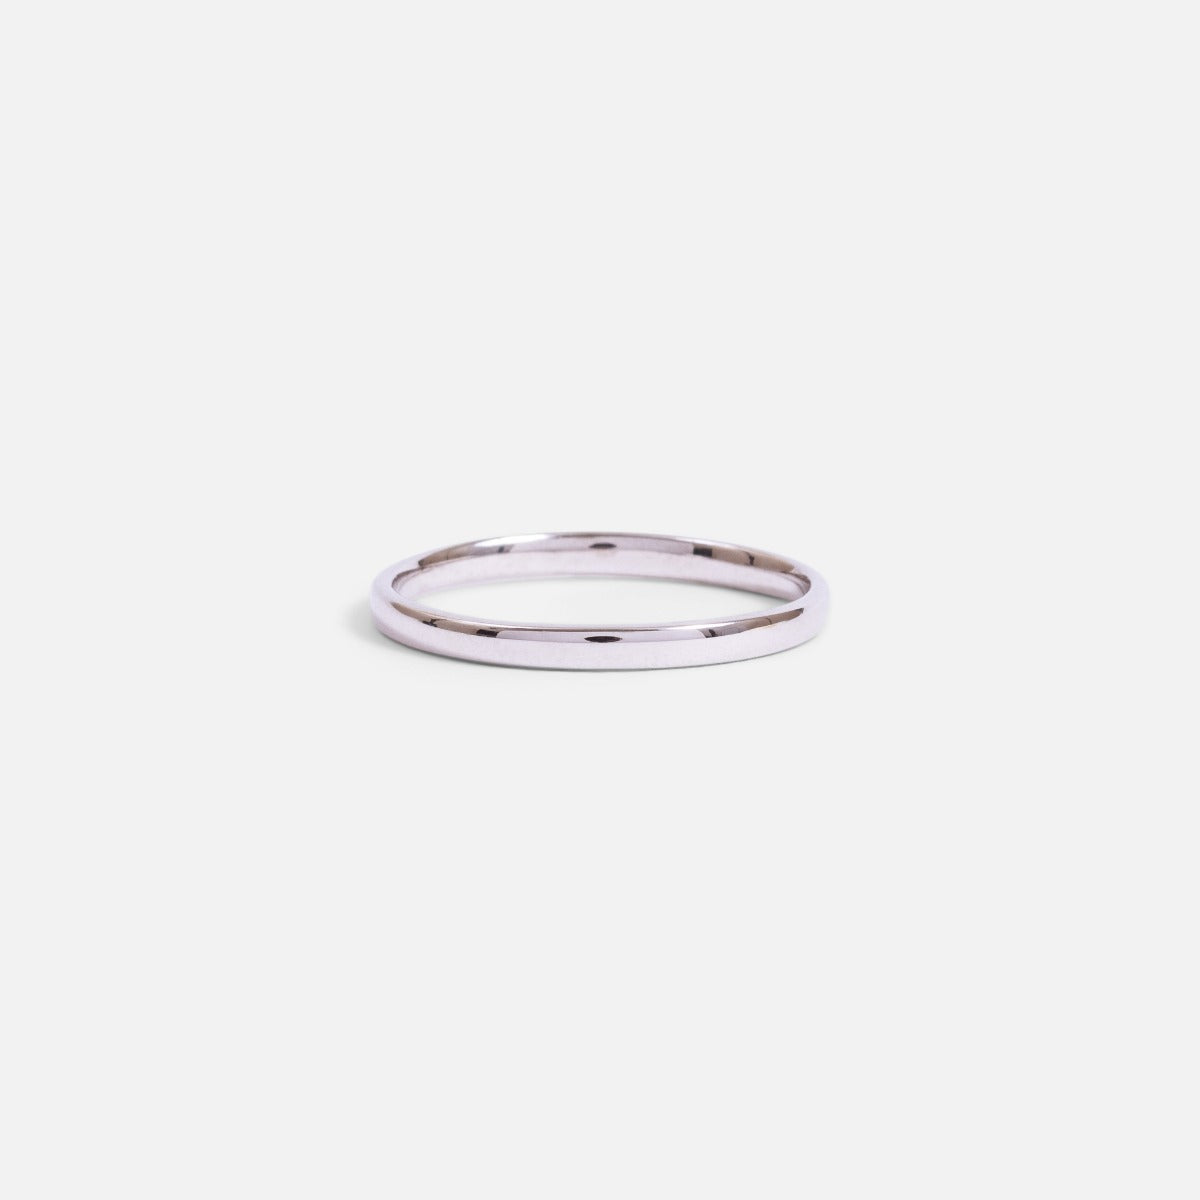 Duo of plain rings in sterling silver